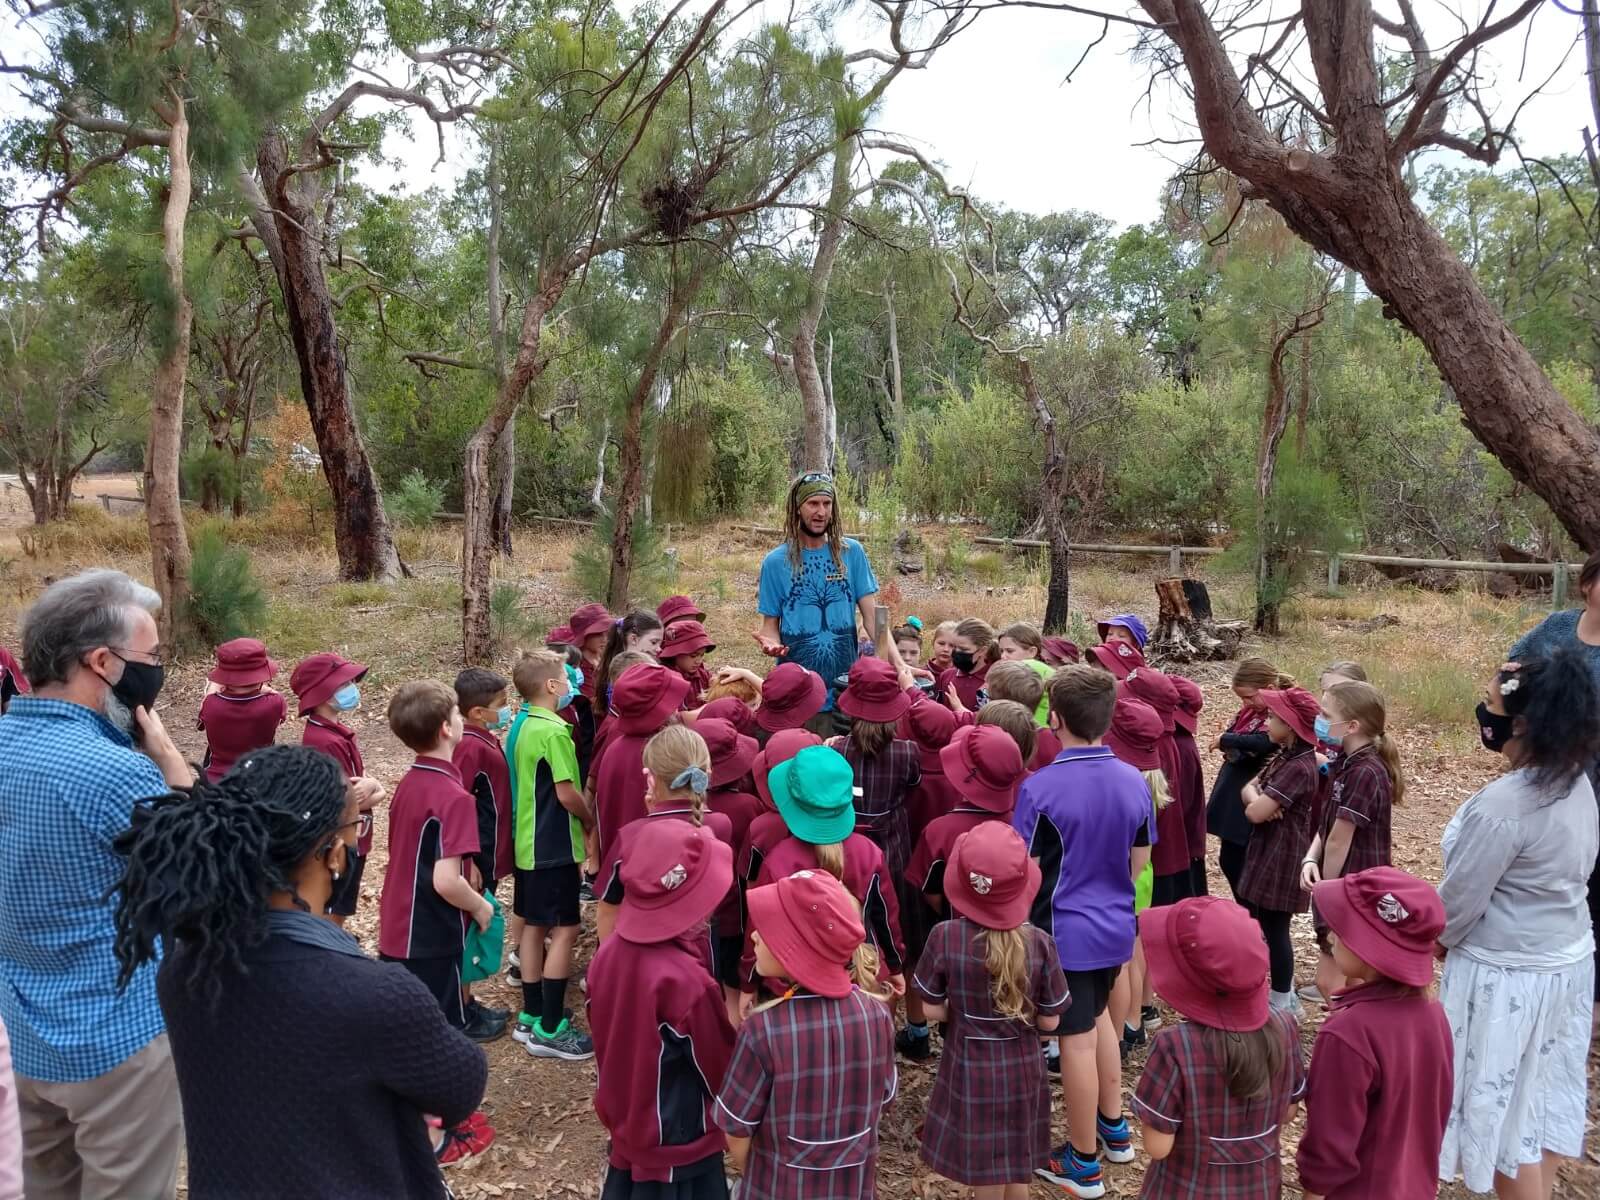 Walliston Primary School during a conservation experience as part of the City's Adopt-A-Patch program